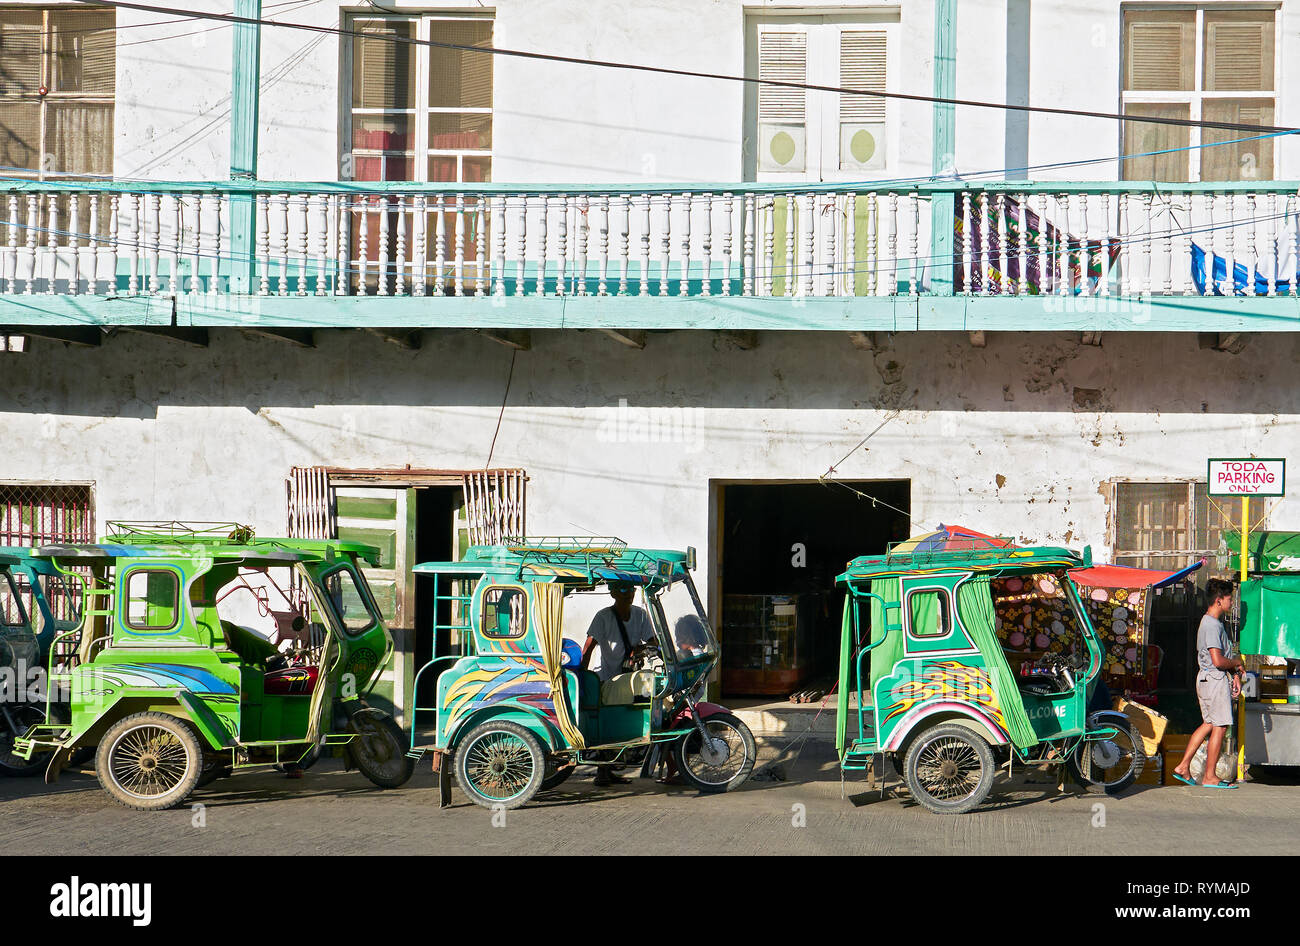 Romblon, Romblon Province, Philippines: Three green tricycles in the town center waiting for passengers, old buildings in background Stock Photo